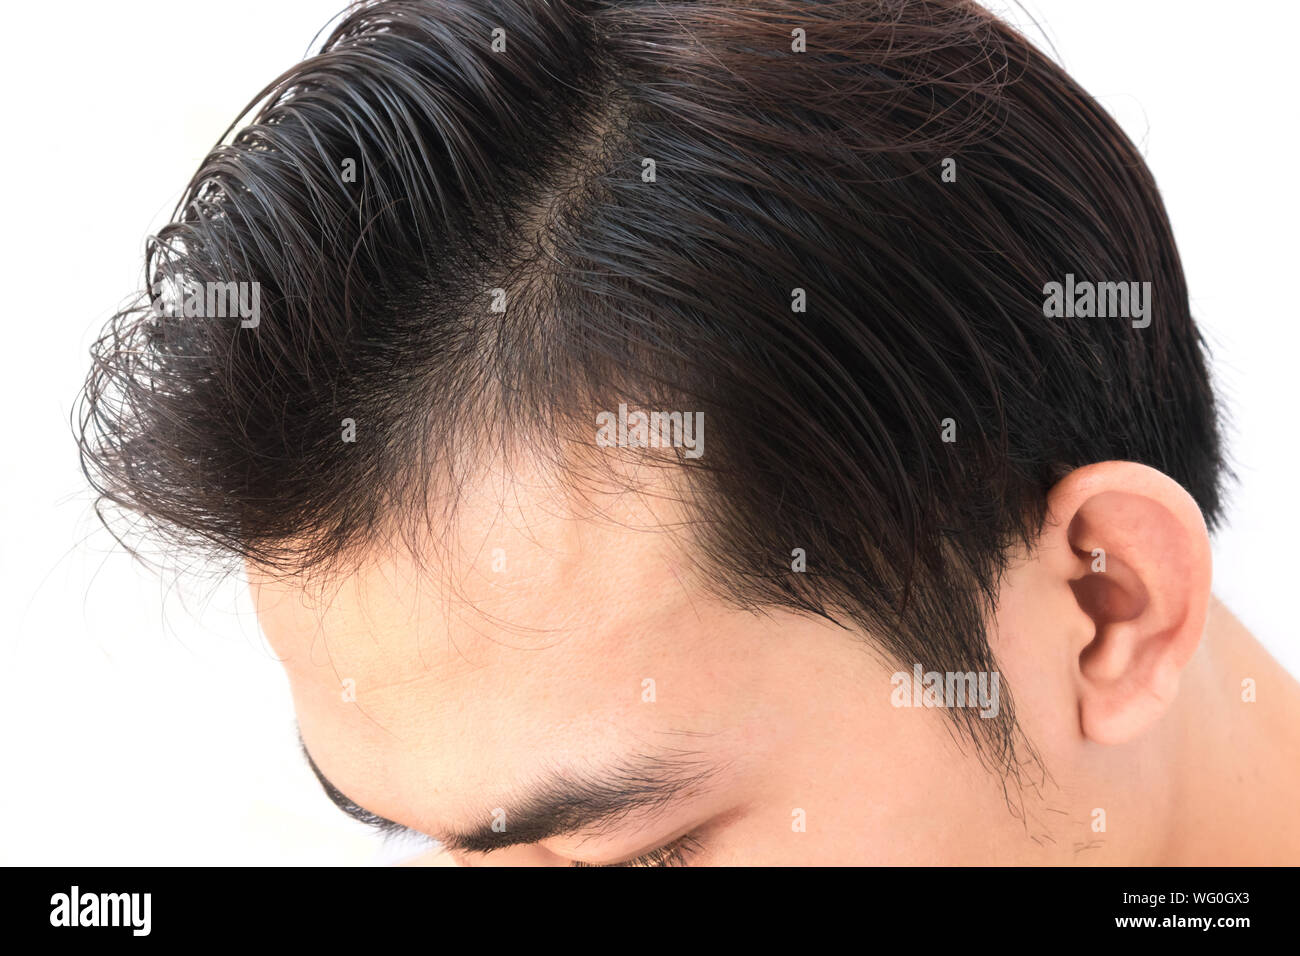 Cropped Image Of Man With Black Hair Against White Background Stock Photo